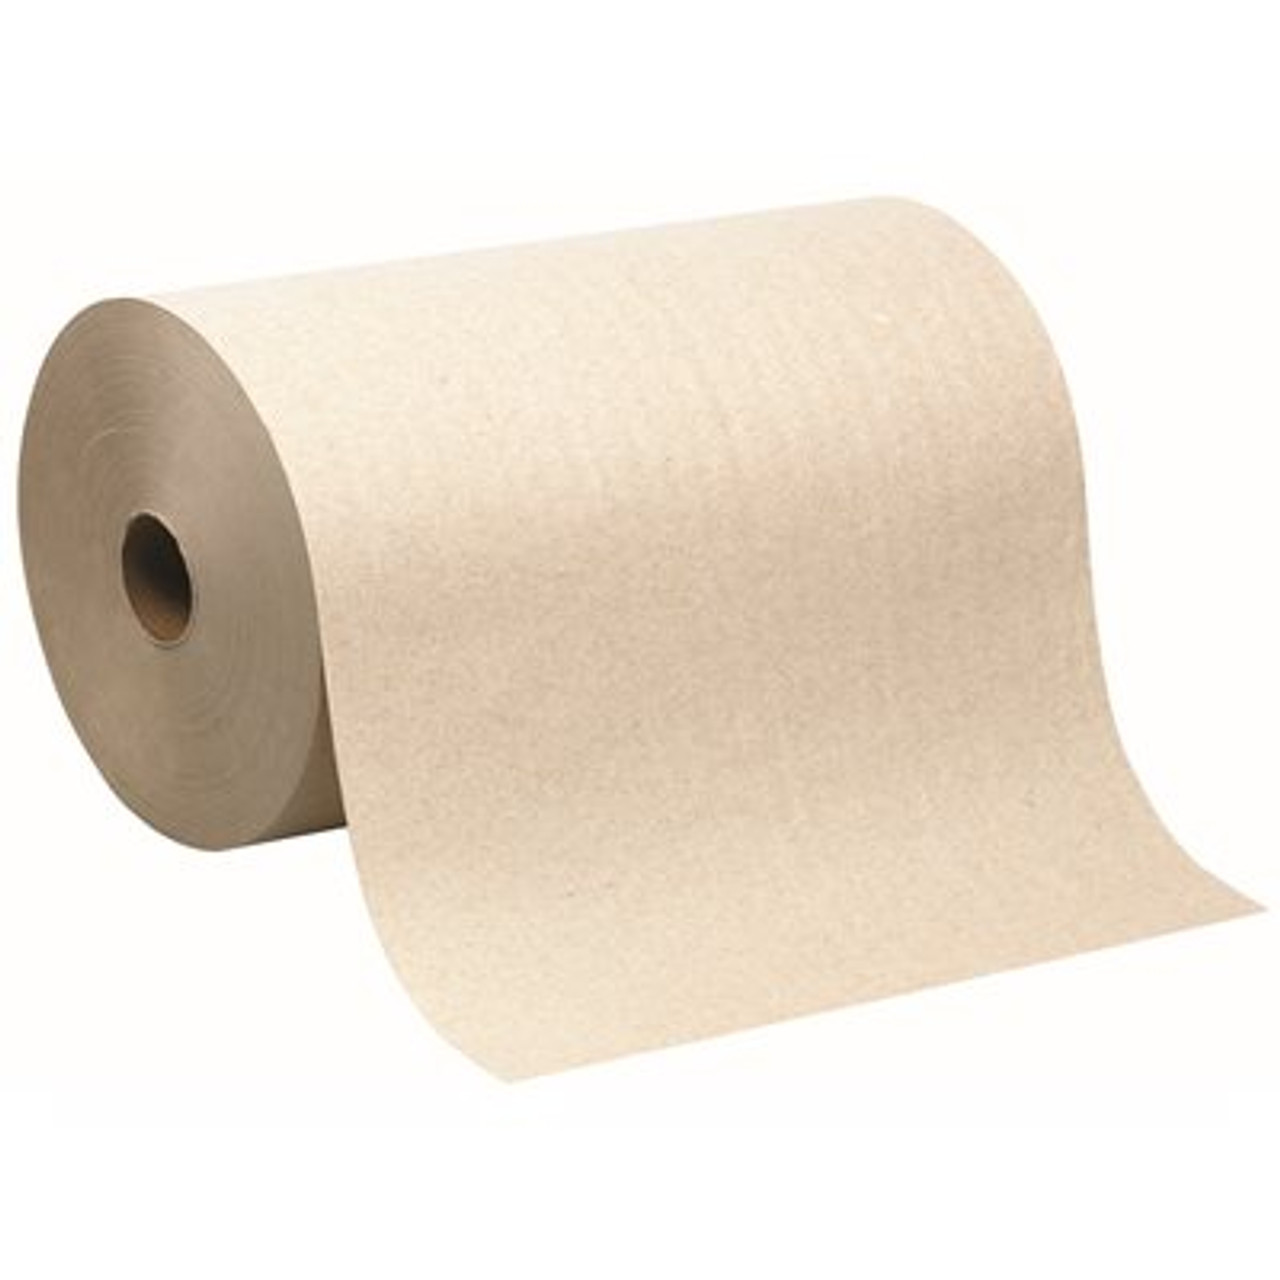 enMotion 8 in. 1-Ply Brown Recycled Towel Roll (700 ft./6-Rolls per Case)